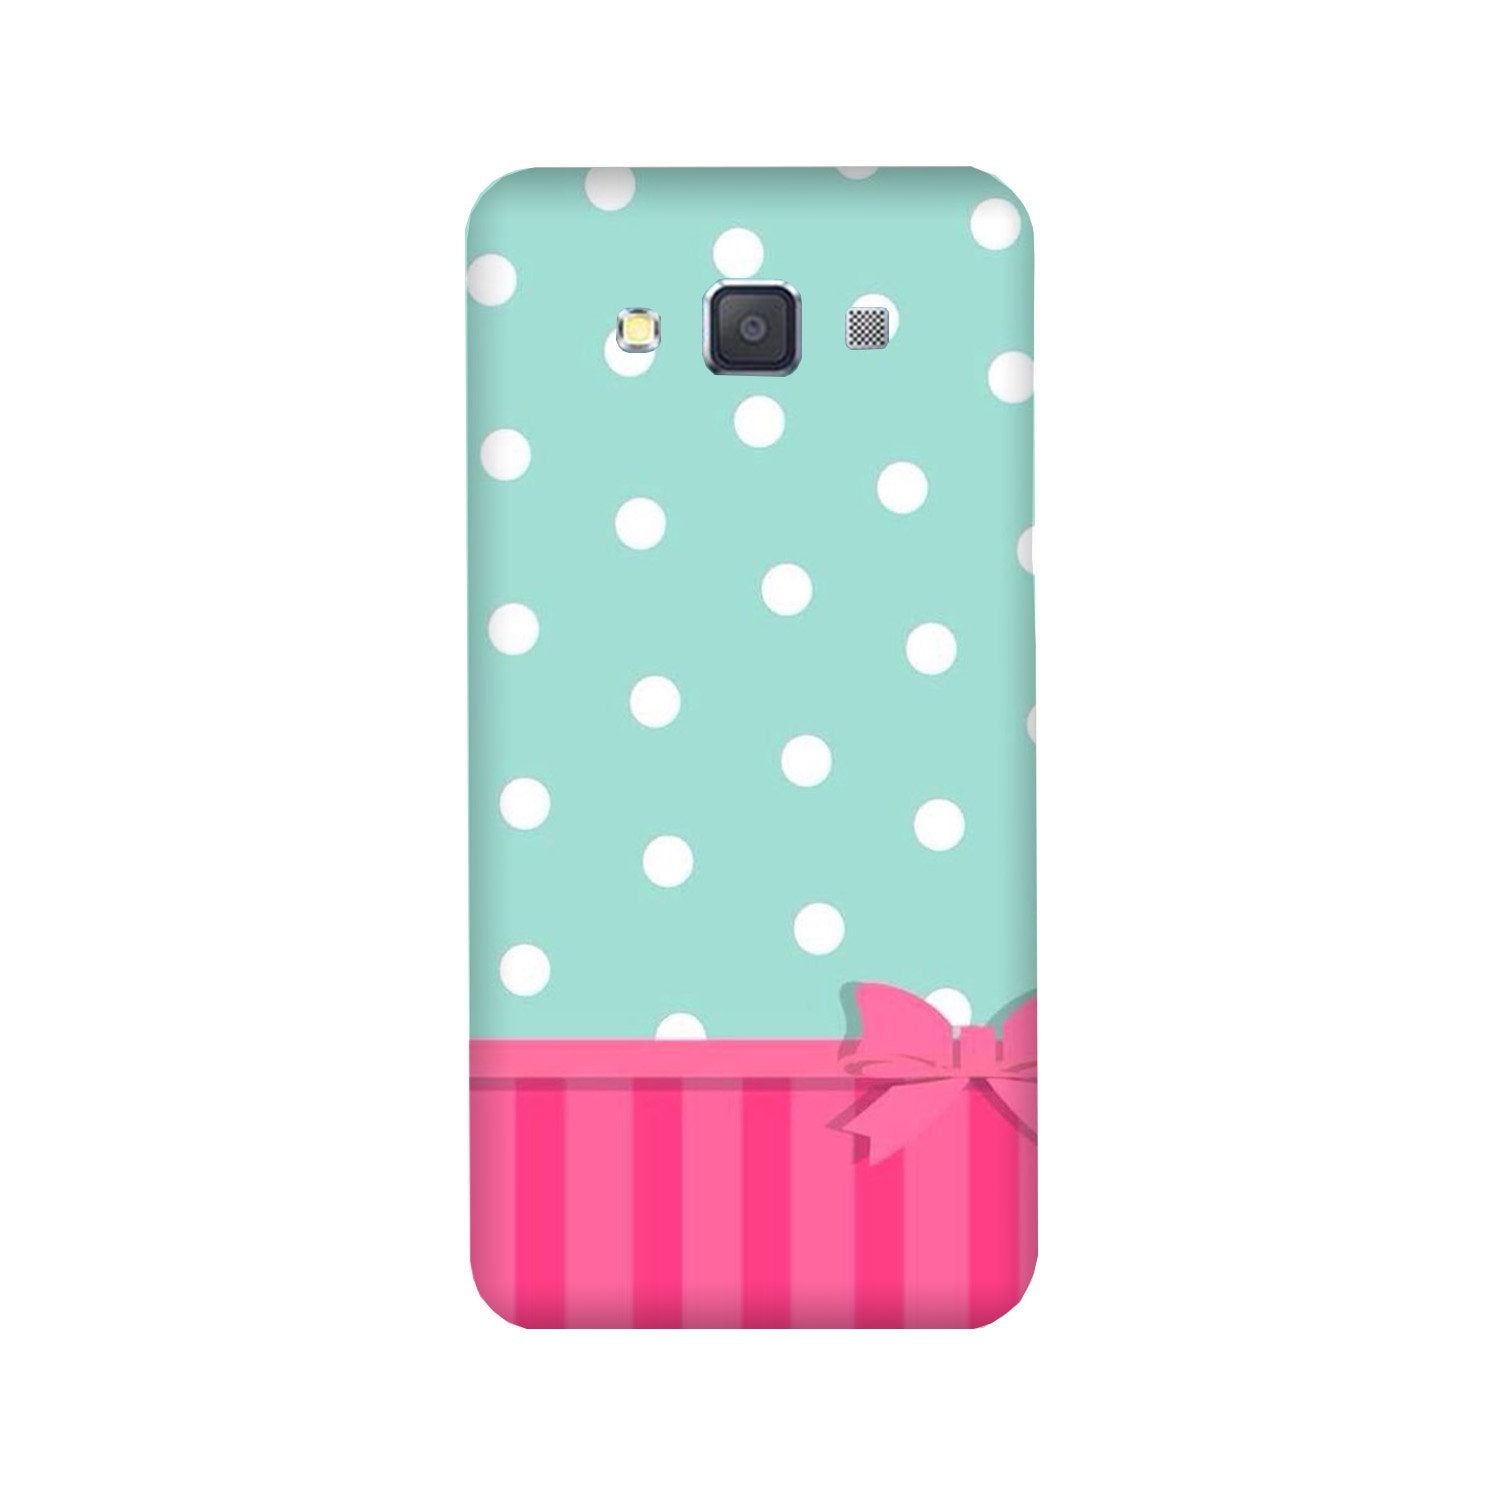 Gift Wrap Case for Galaxy Grand 2